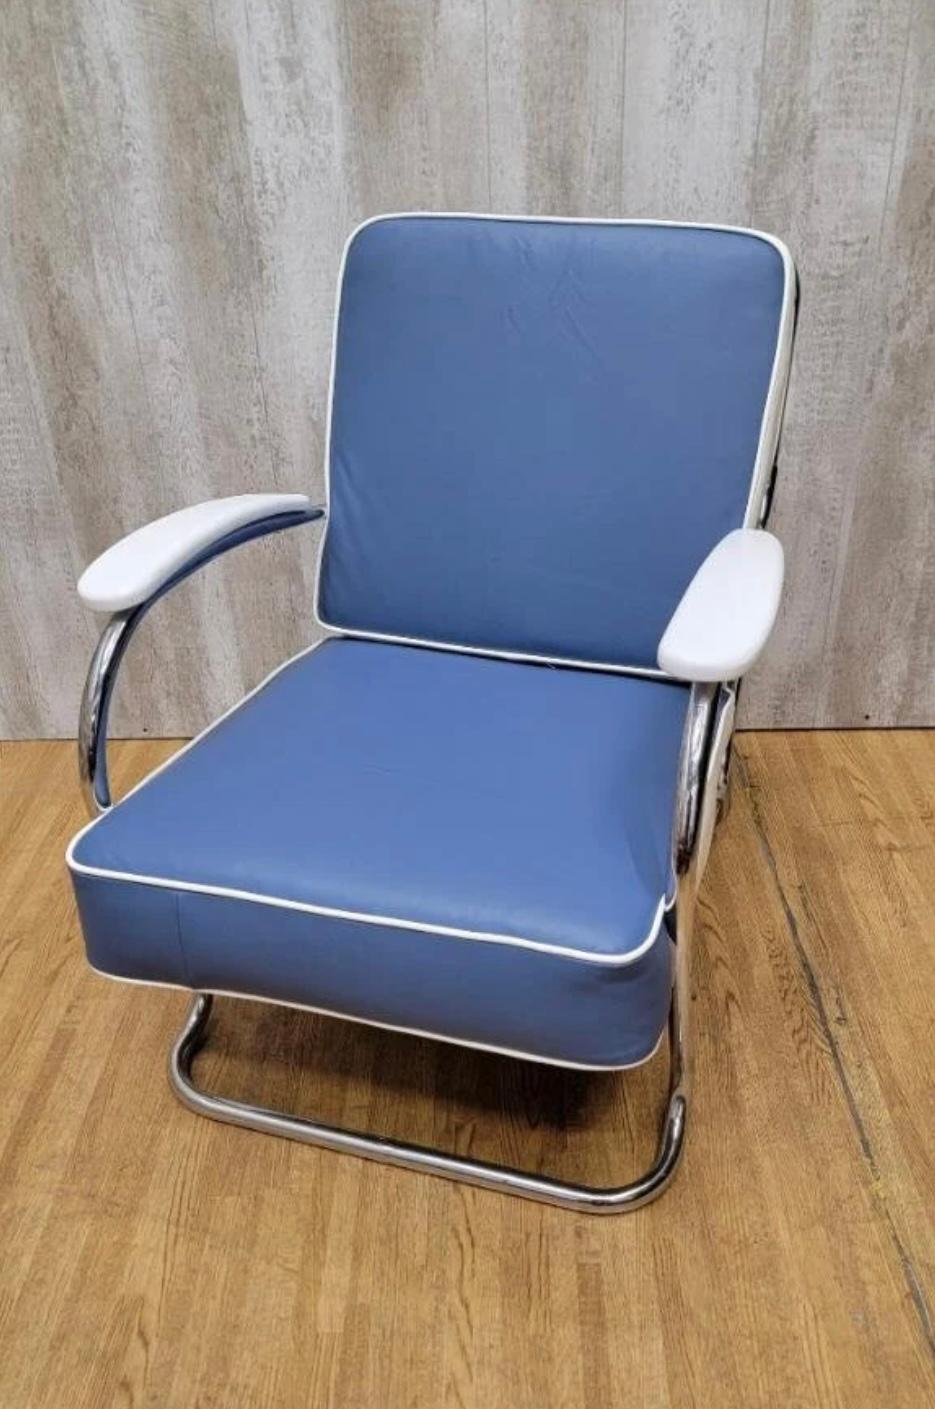 Art Deco Mucke-Melder Tubular Steel Lounge Chair Newly Upholstered in Leather

1950s Art Deco Mucke-Melder tubular steel molded wood arm lounge chair. This chair is newly upholstered in a lustrous full grain 2-Toned Edelman Leather with a